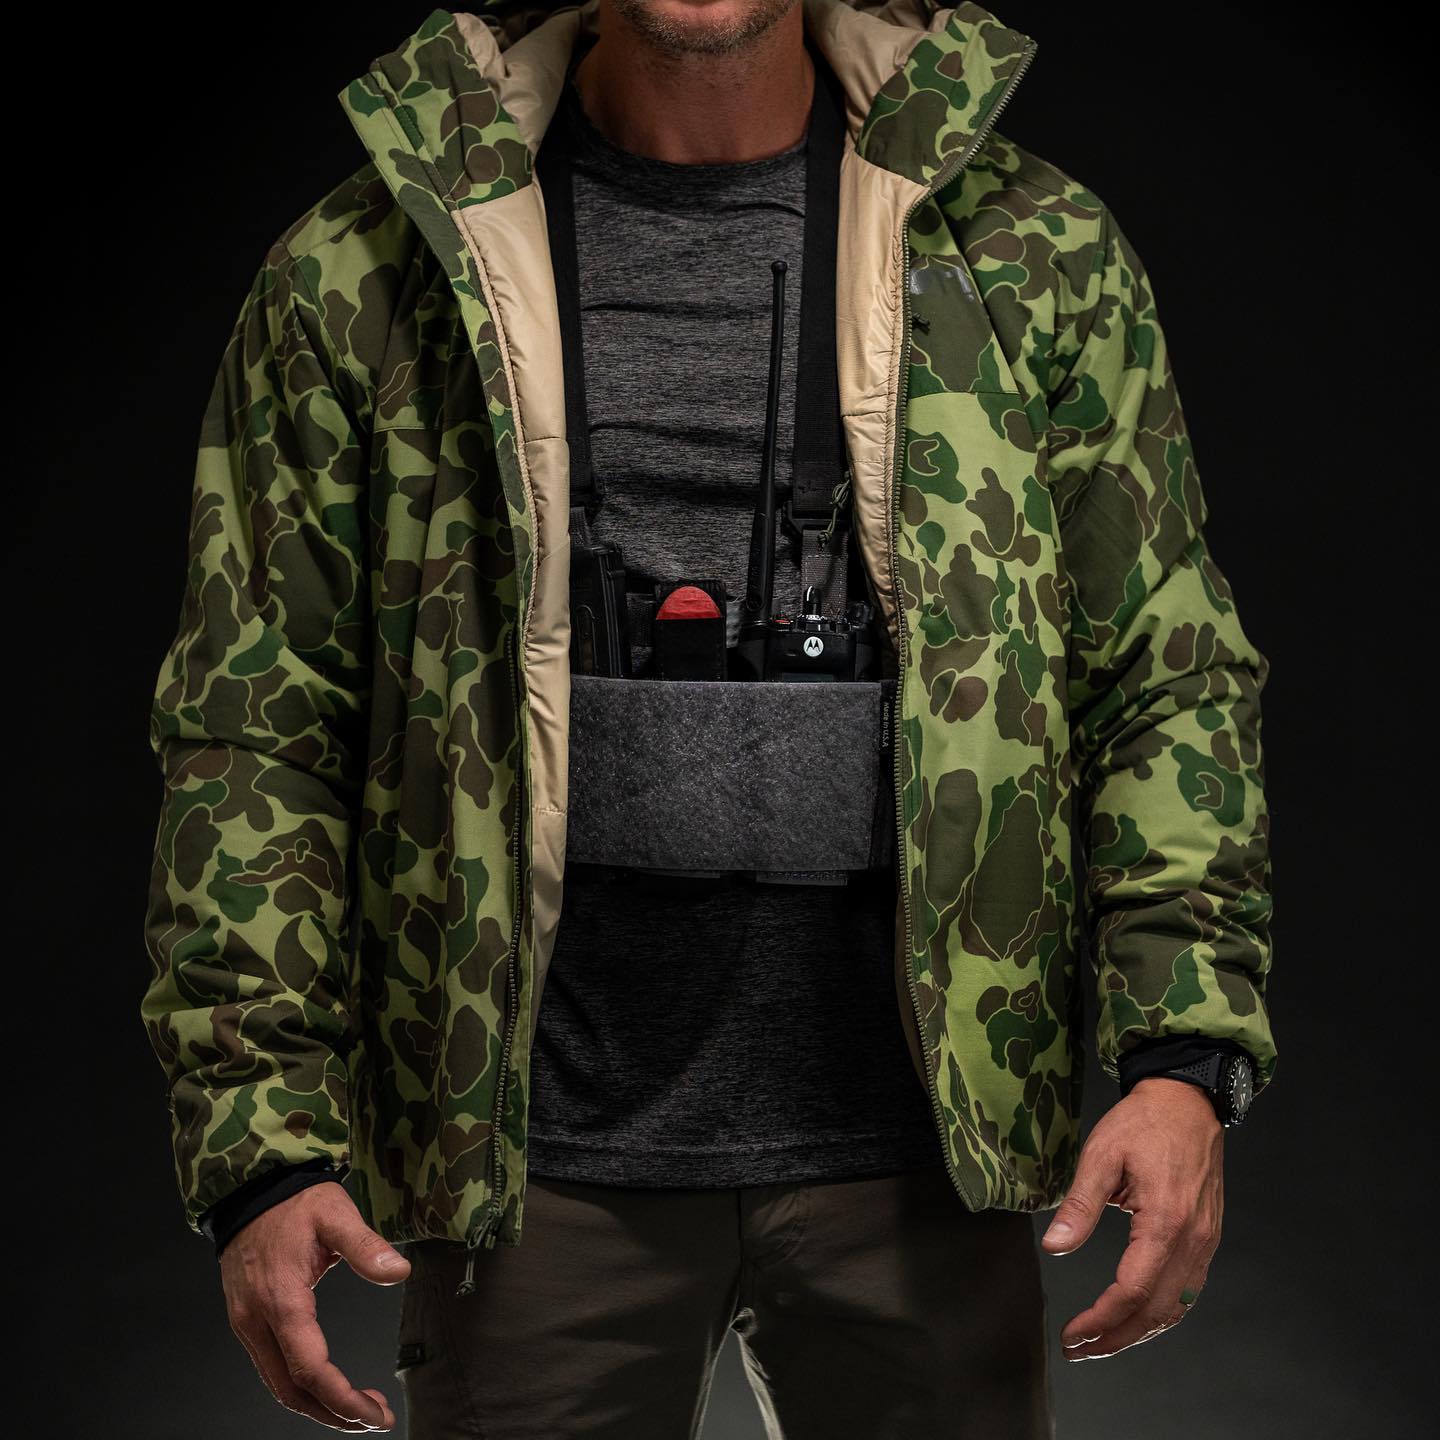 Otte Gear LV Insulated Hoody Hooded Jacket MultiCam